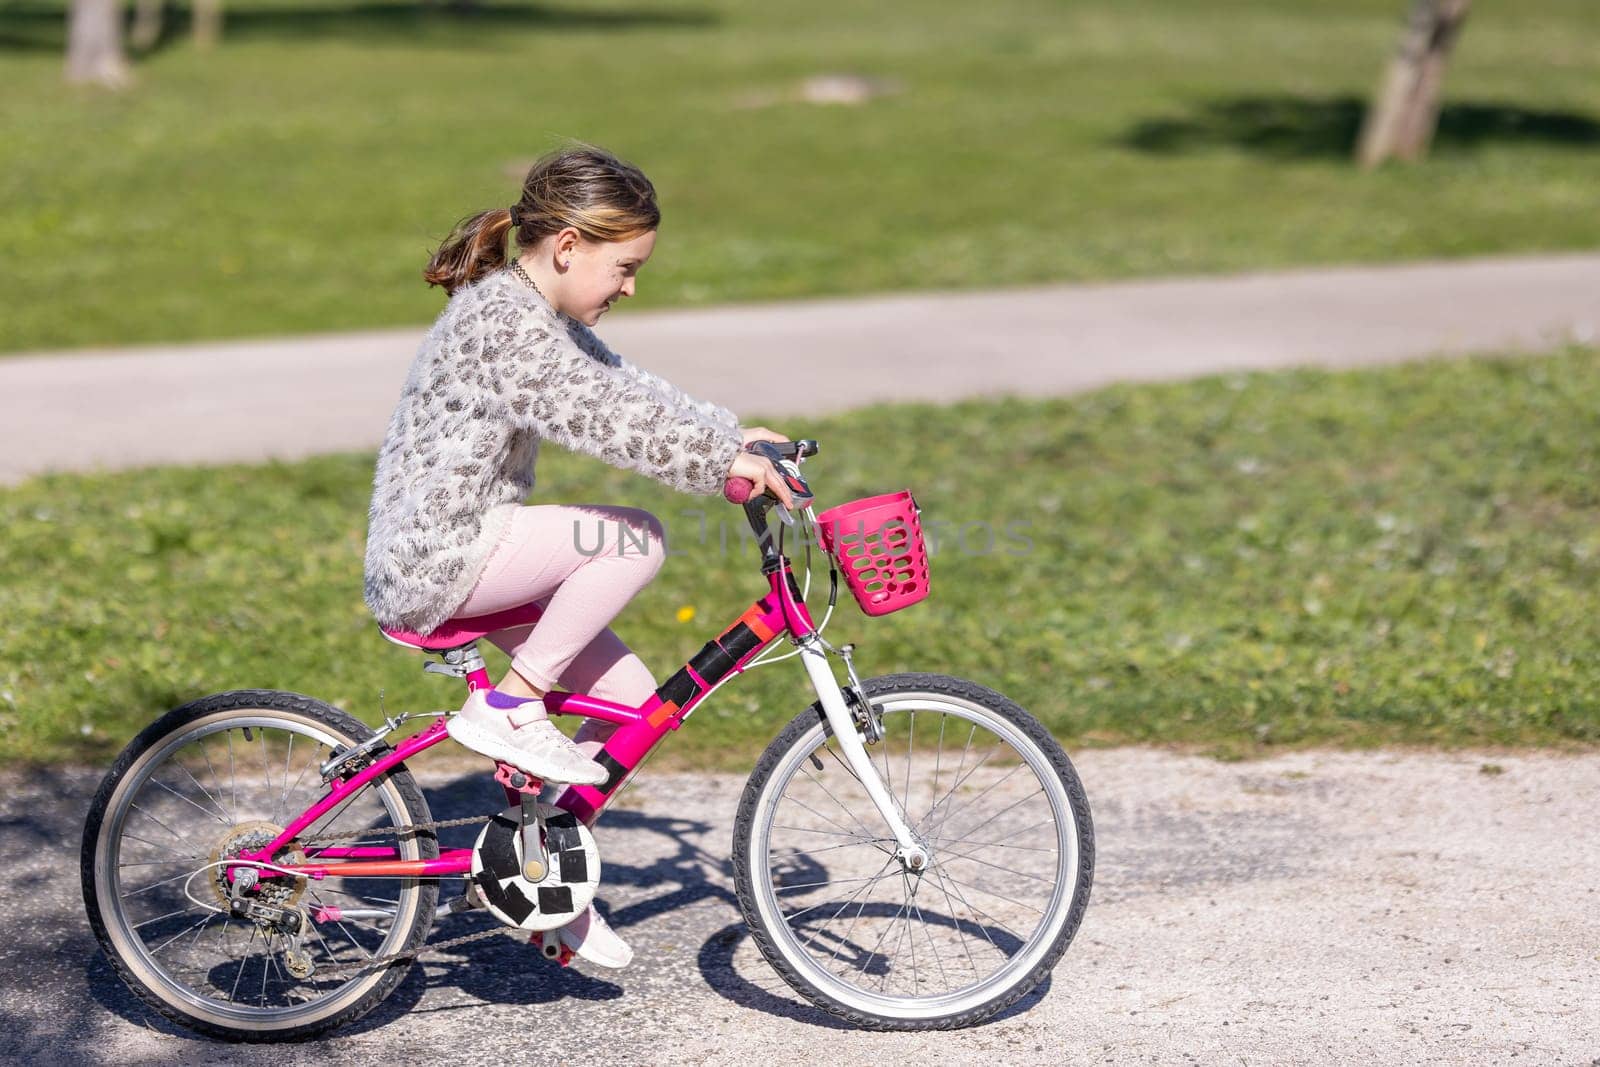 A young girl is riding a pink bike with a basket on the front by Studia72